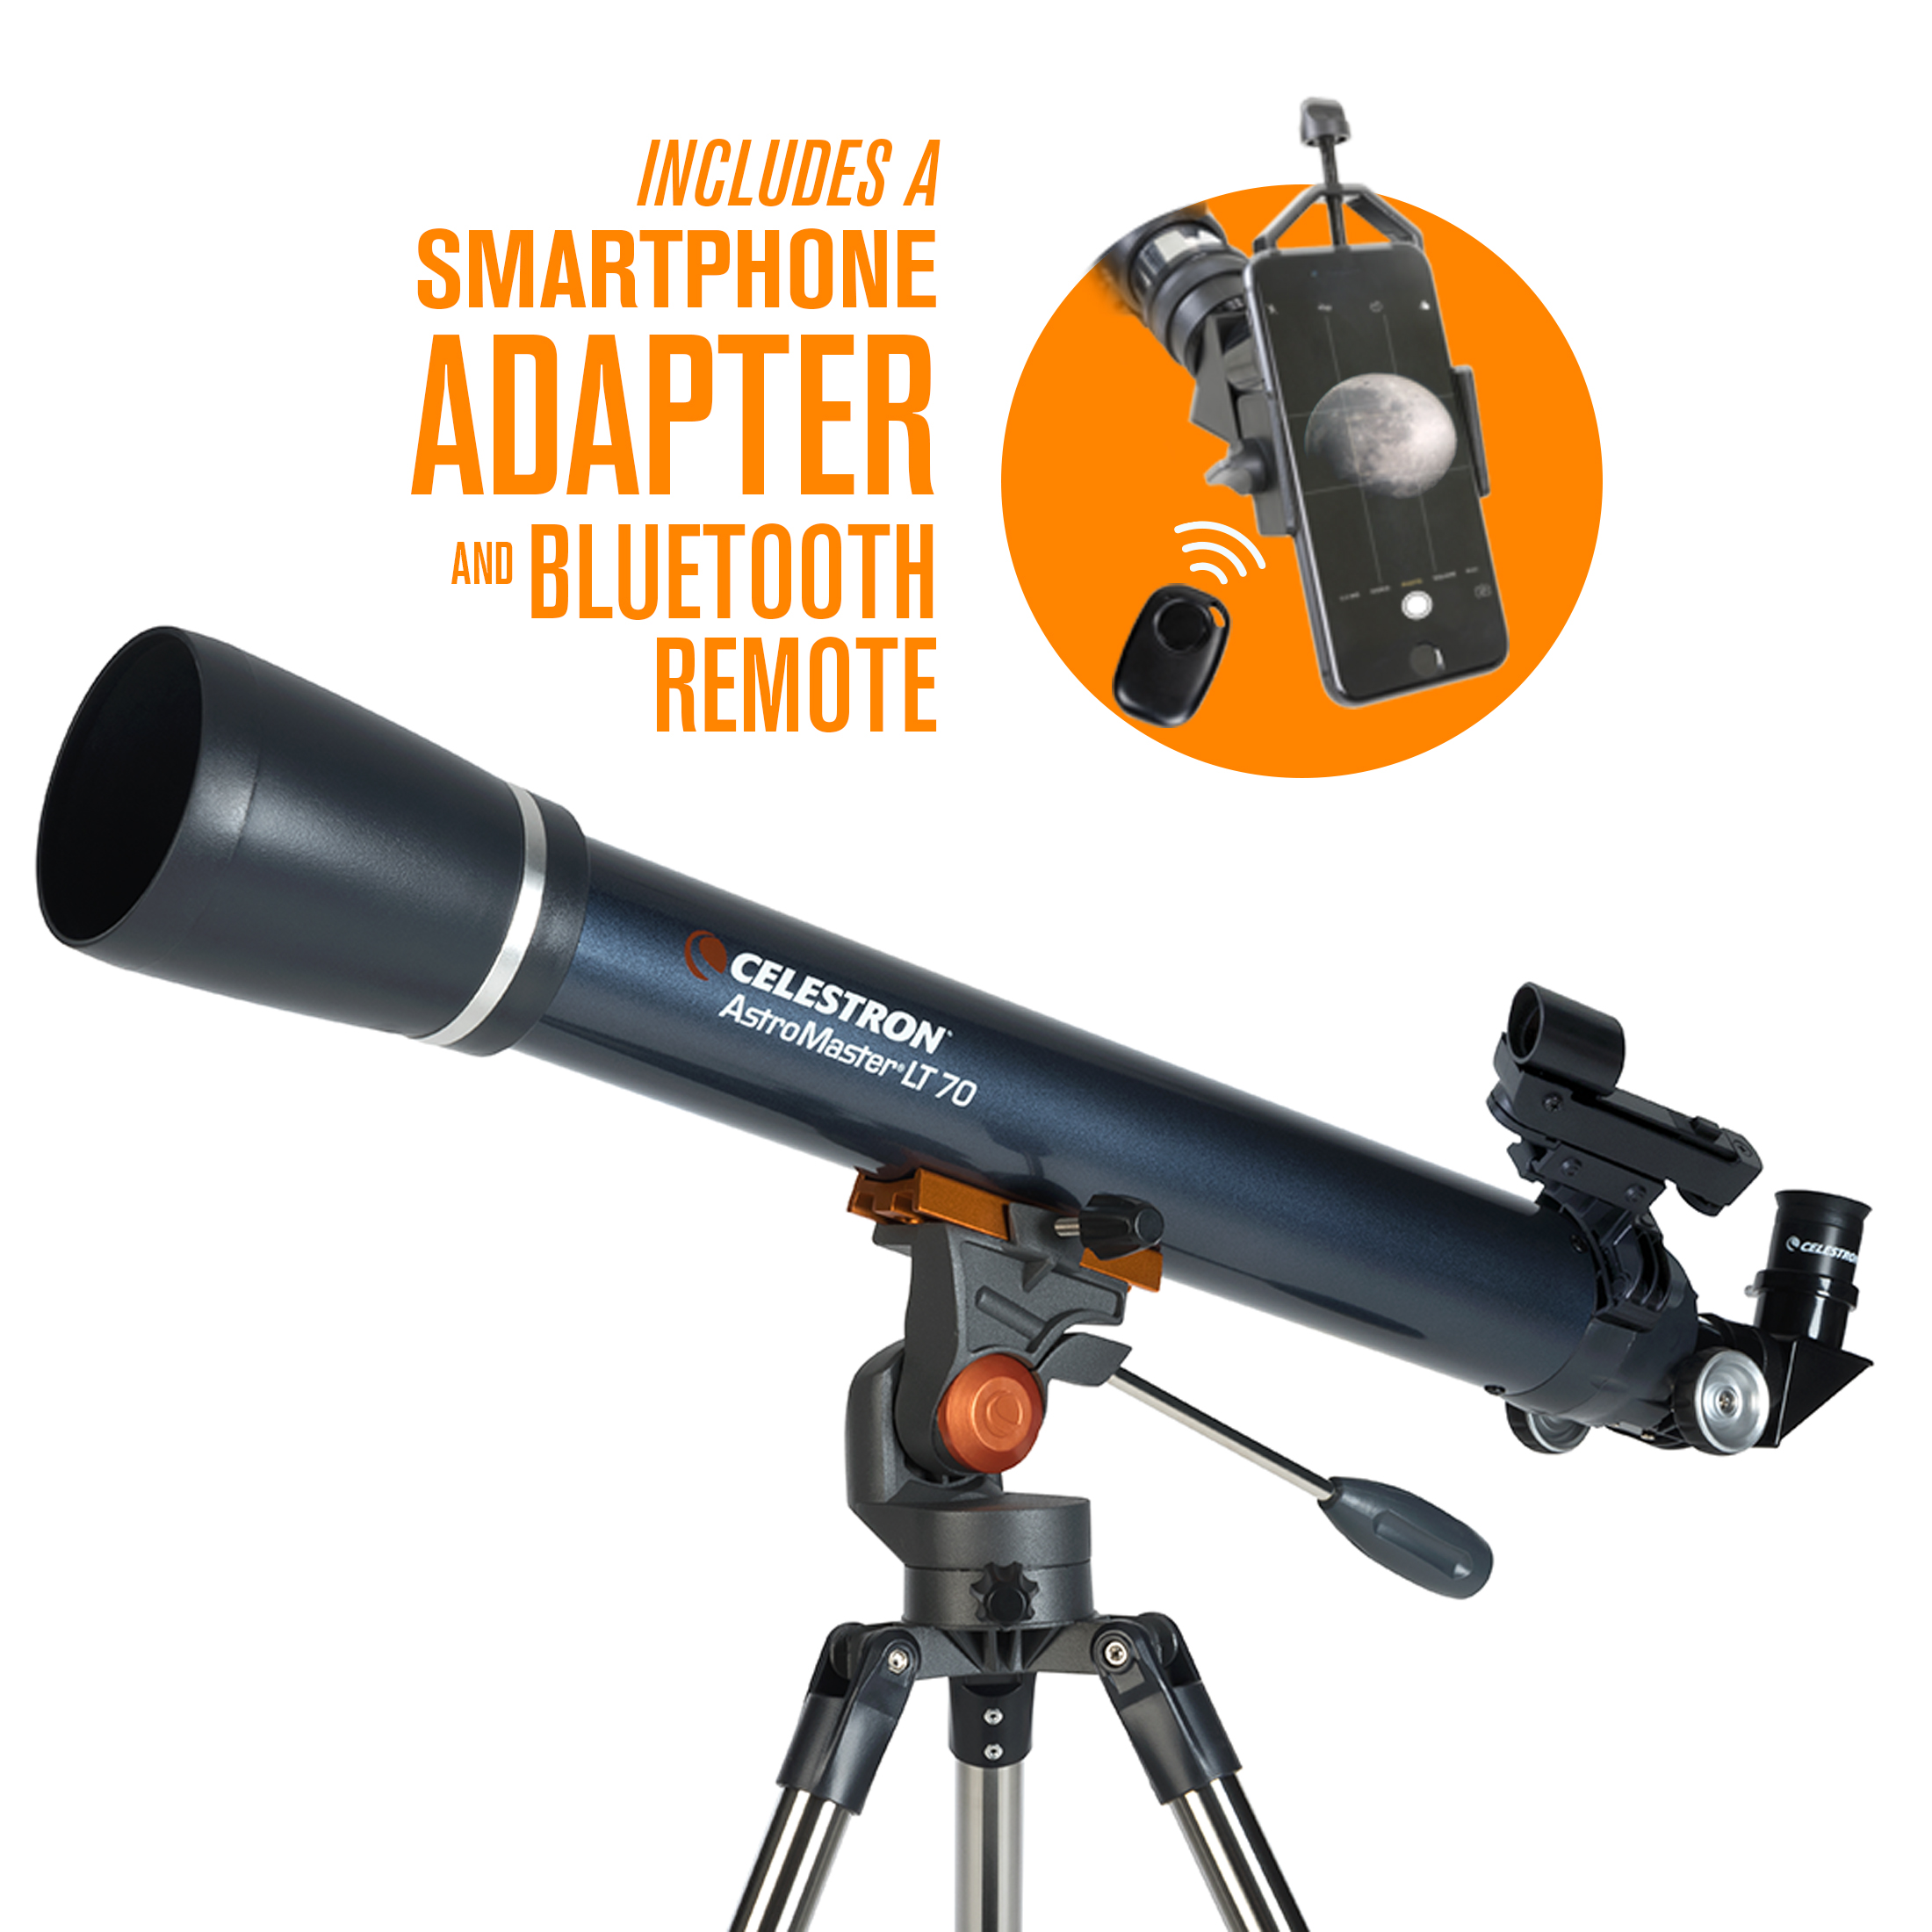 Celestron AstroMaster 70AZ LT Refractor Telescope Kit with Smartphone Adapter and Bluetooth Remote, Ideal Telescope for Beginners, Capture Your Own Images, Tripod plus Bonus Accessories Included - image 1 of 8